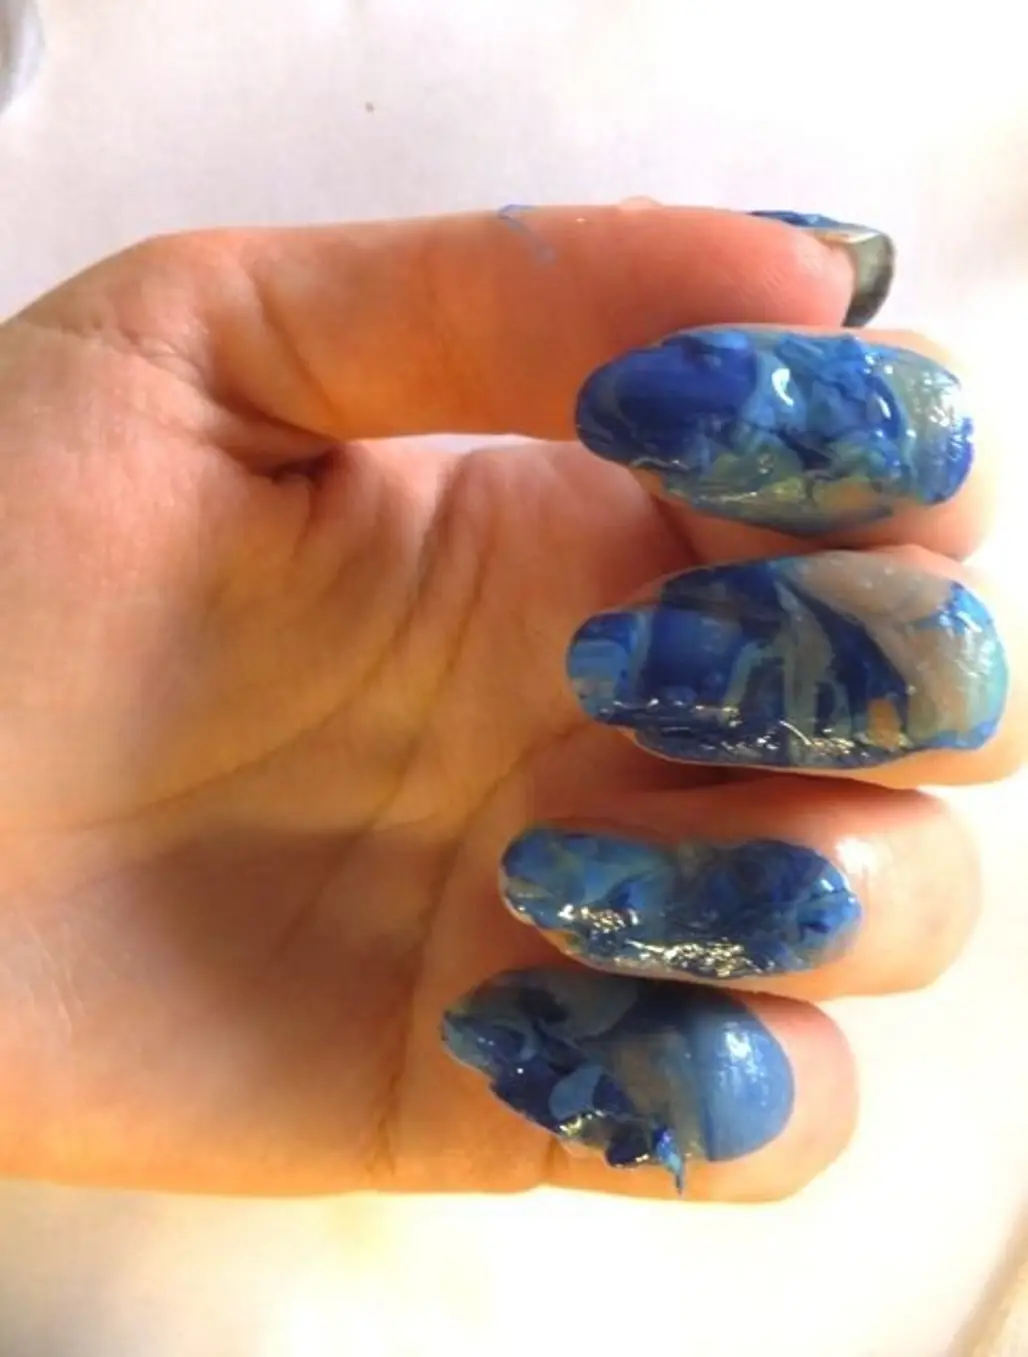 The Marble Nail Art That Didn't Stick